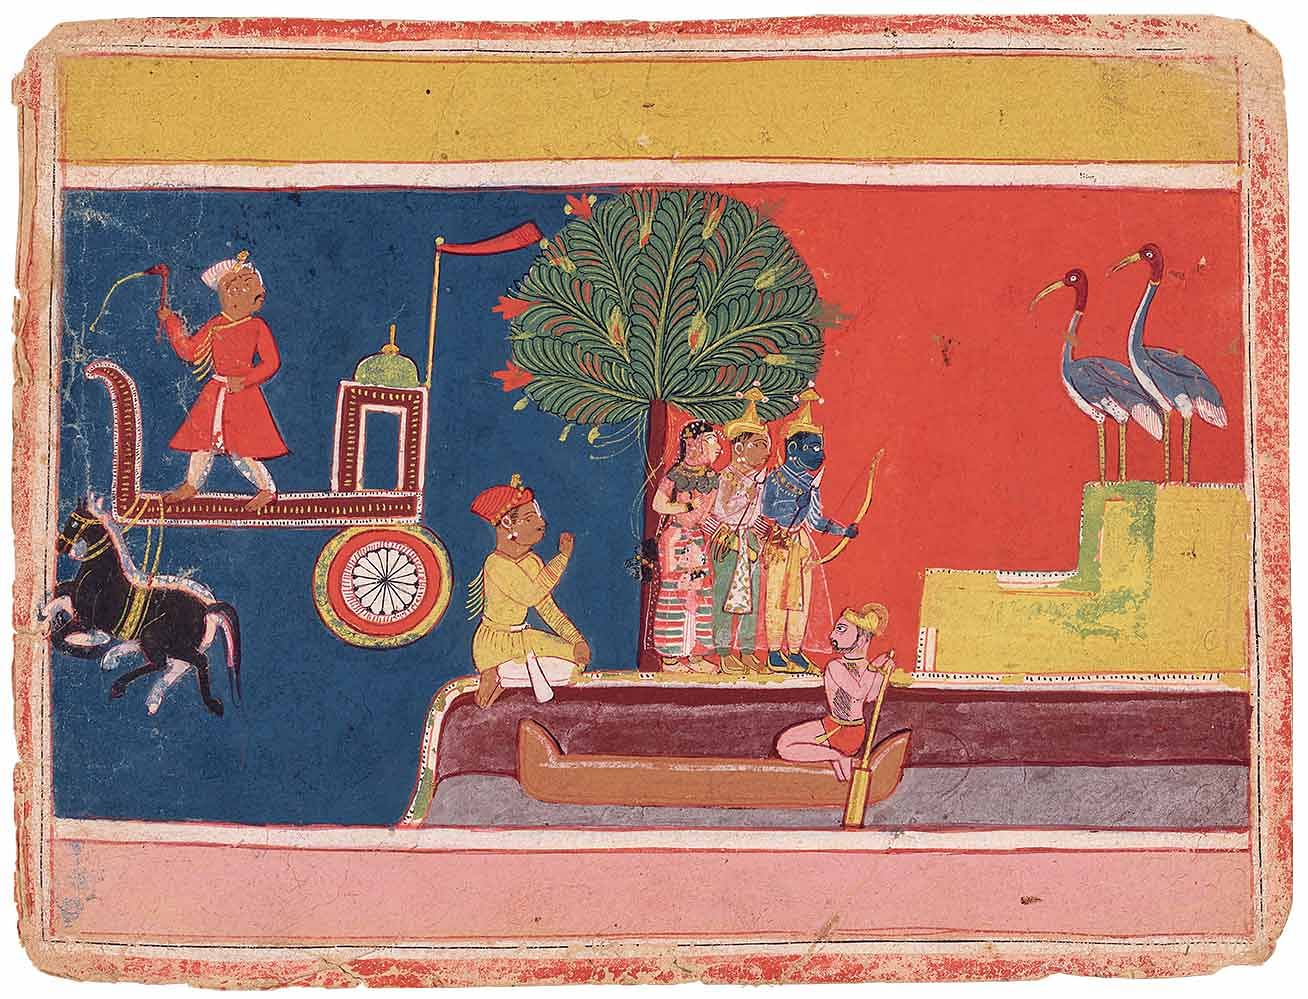 The painter used the vocabu-lary of the Early Rajput style  to depict the chariot and horses. We fid the same ornamental wheels and the same pair of black and white horses, with the white horse drawn in contour lines behind the black one, in the Palam Bhagavata Purana ( compare cats. C.5 & C.8 ) | Niyogi Books